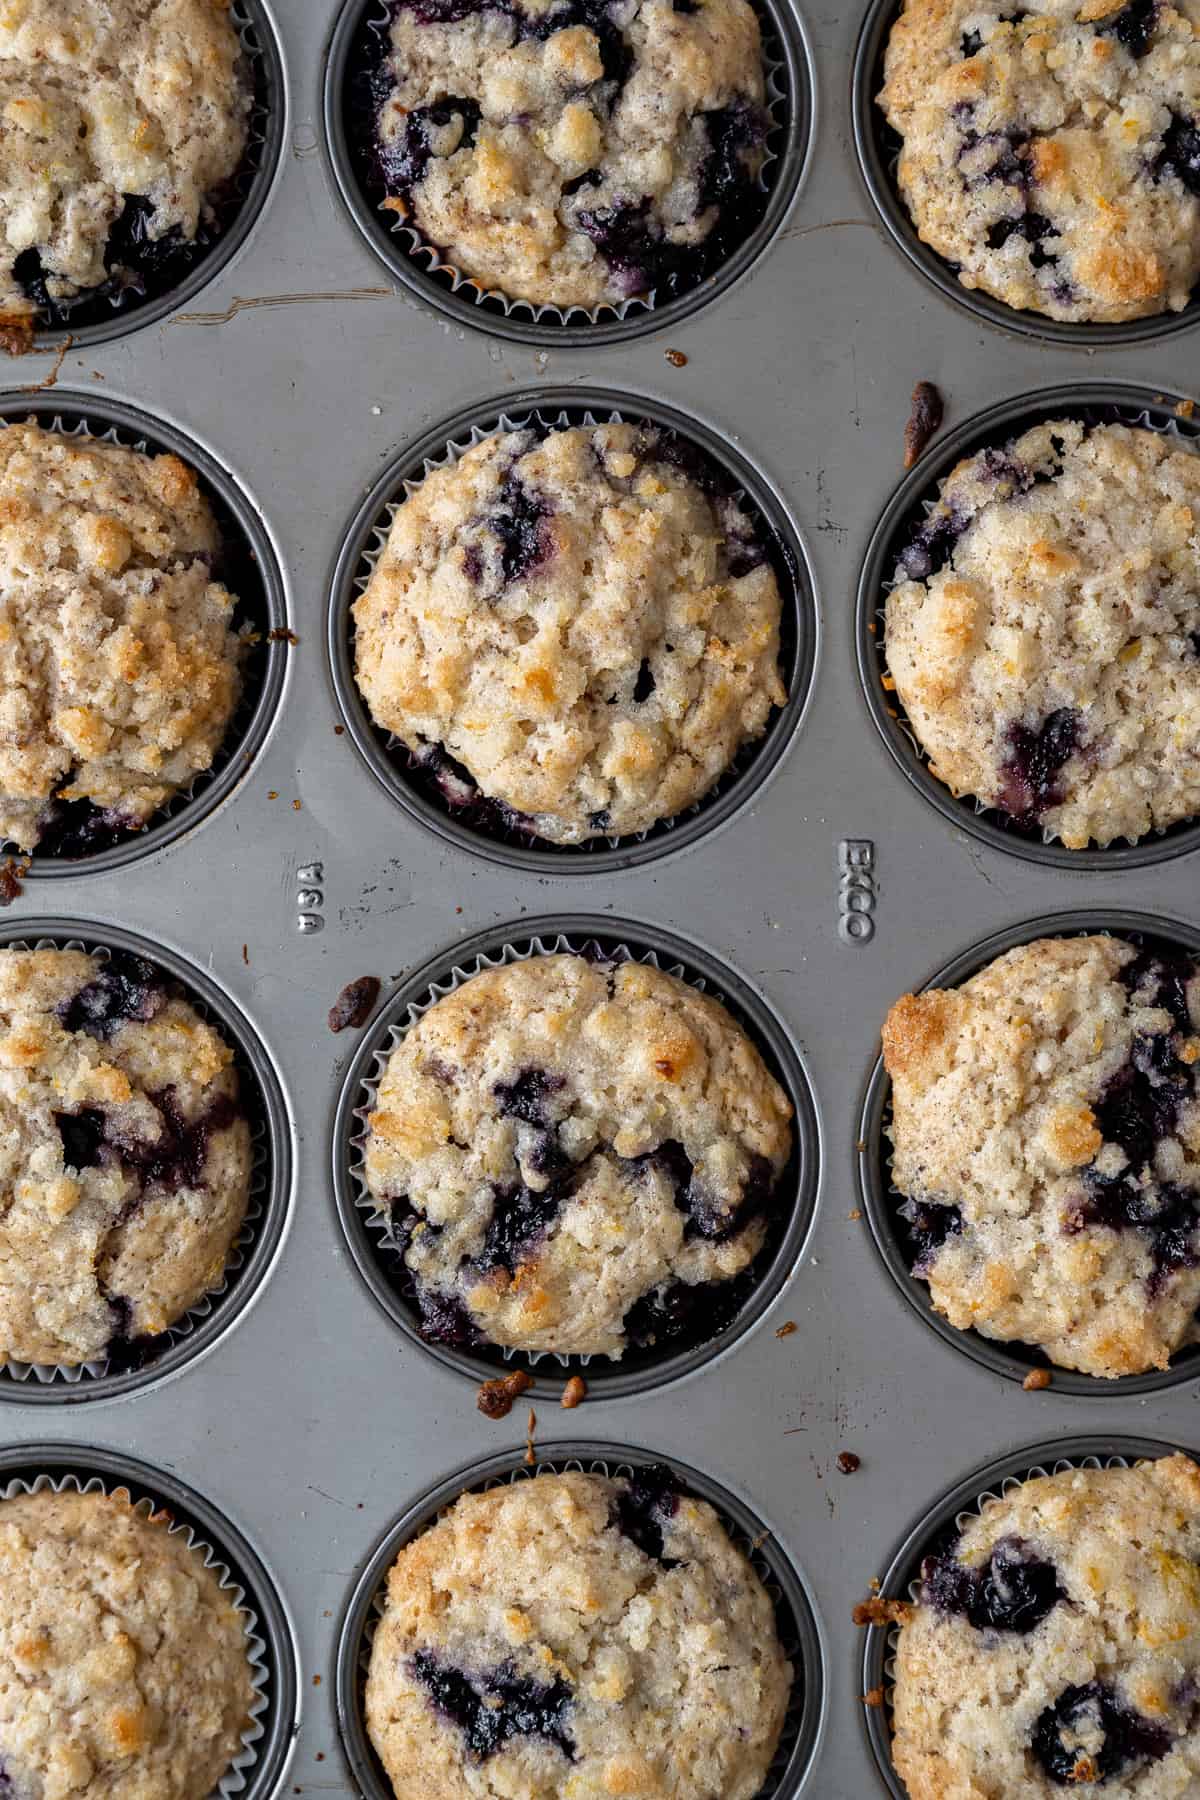 Baked lemon blueberry muffins in a muffin pan.